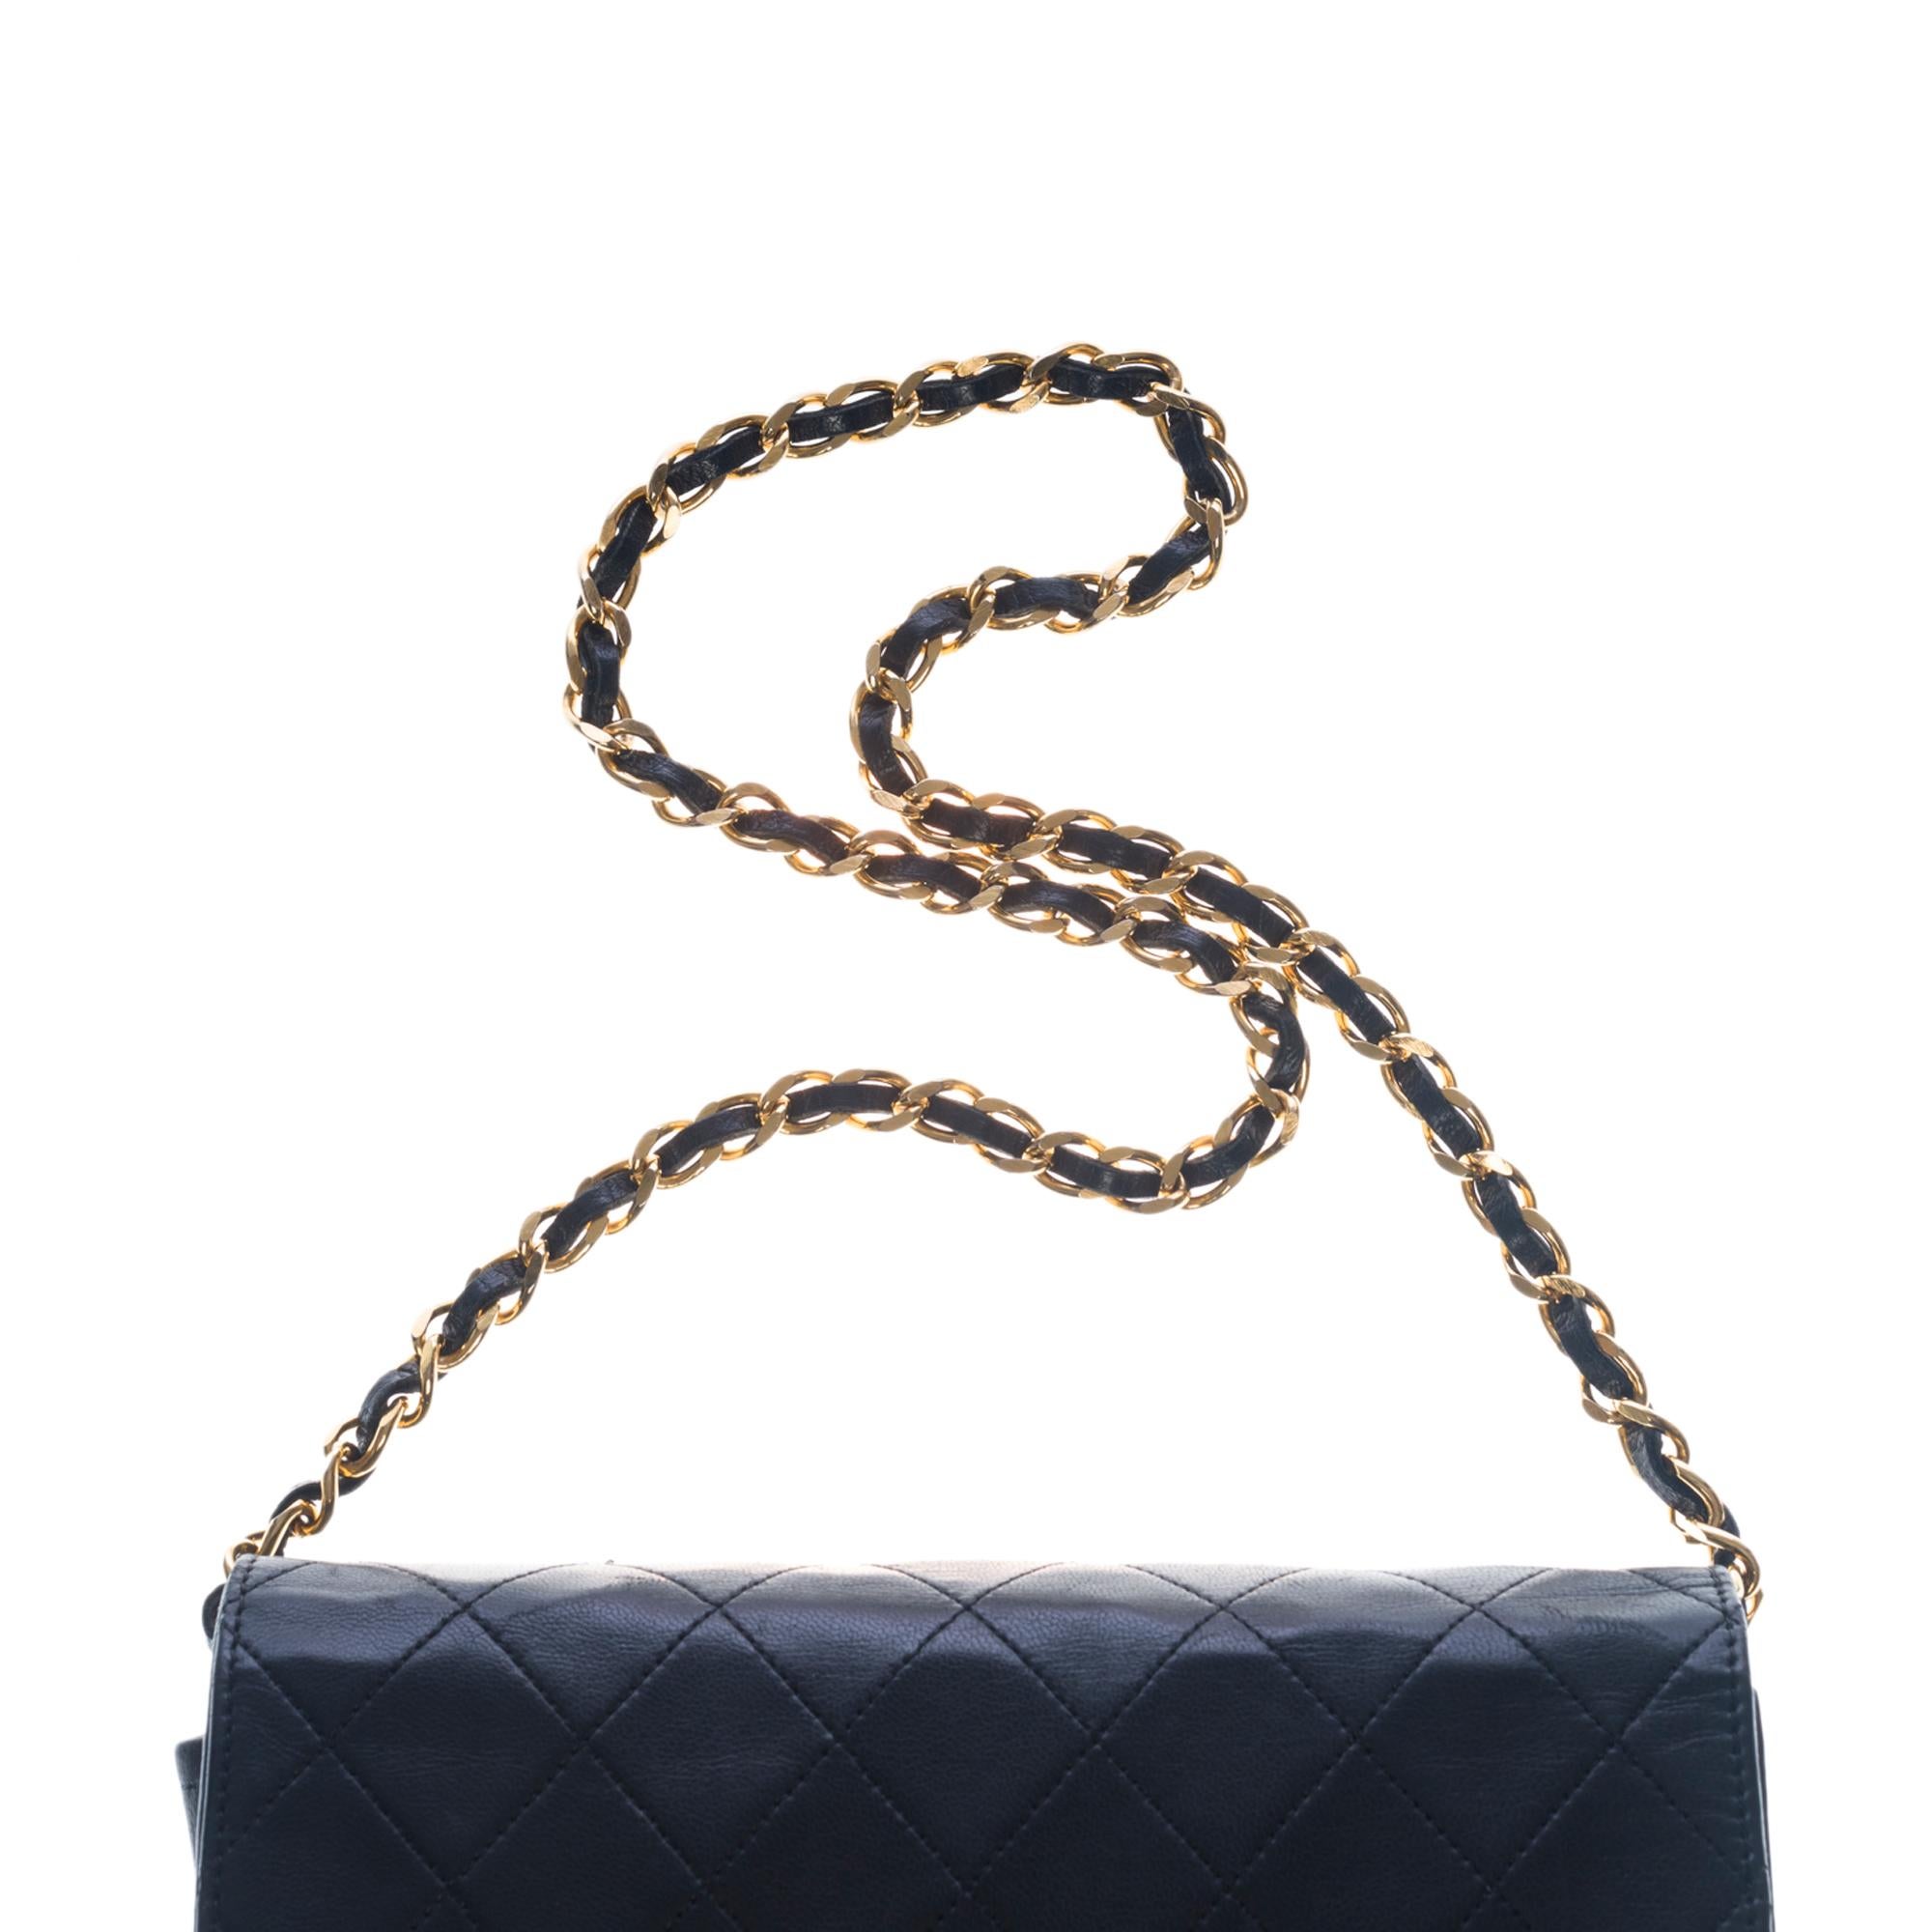 Chanel Classic Mini Full Flap shoulder bag in black quilted lambskin leather, GHW 2